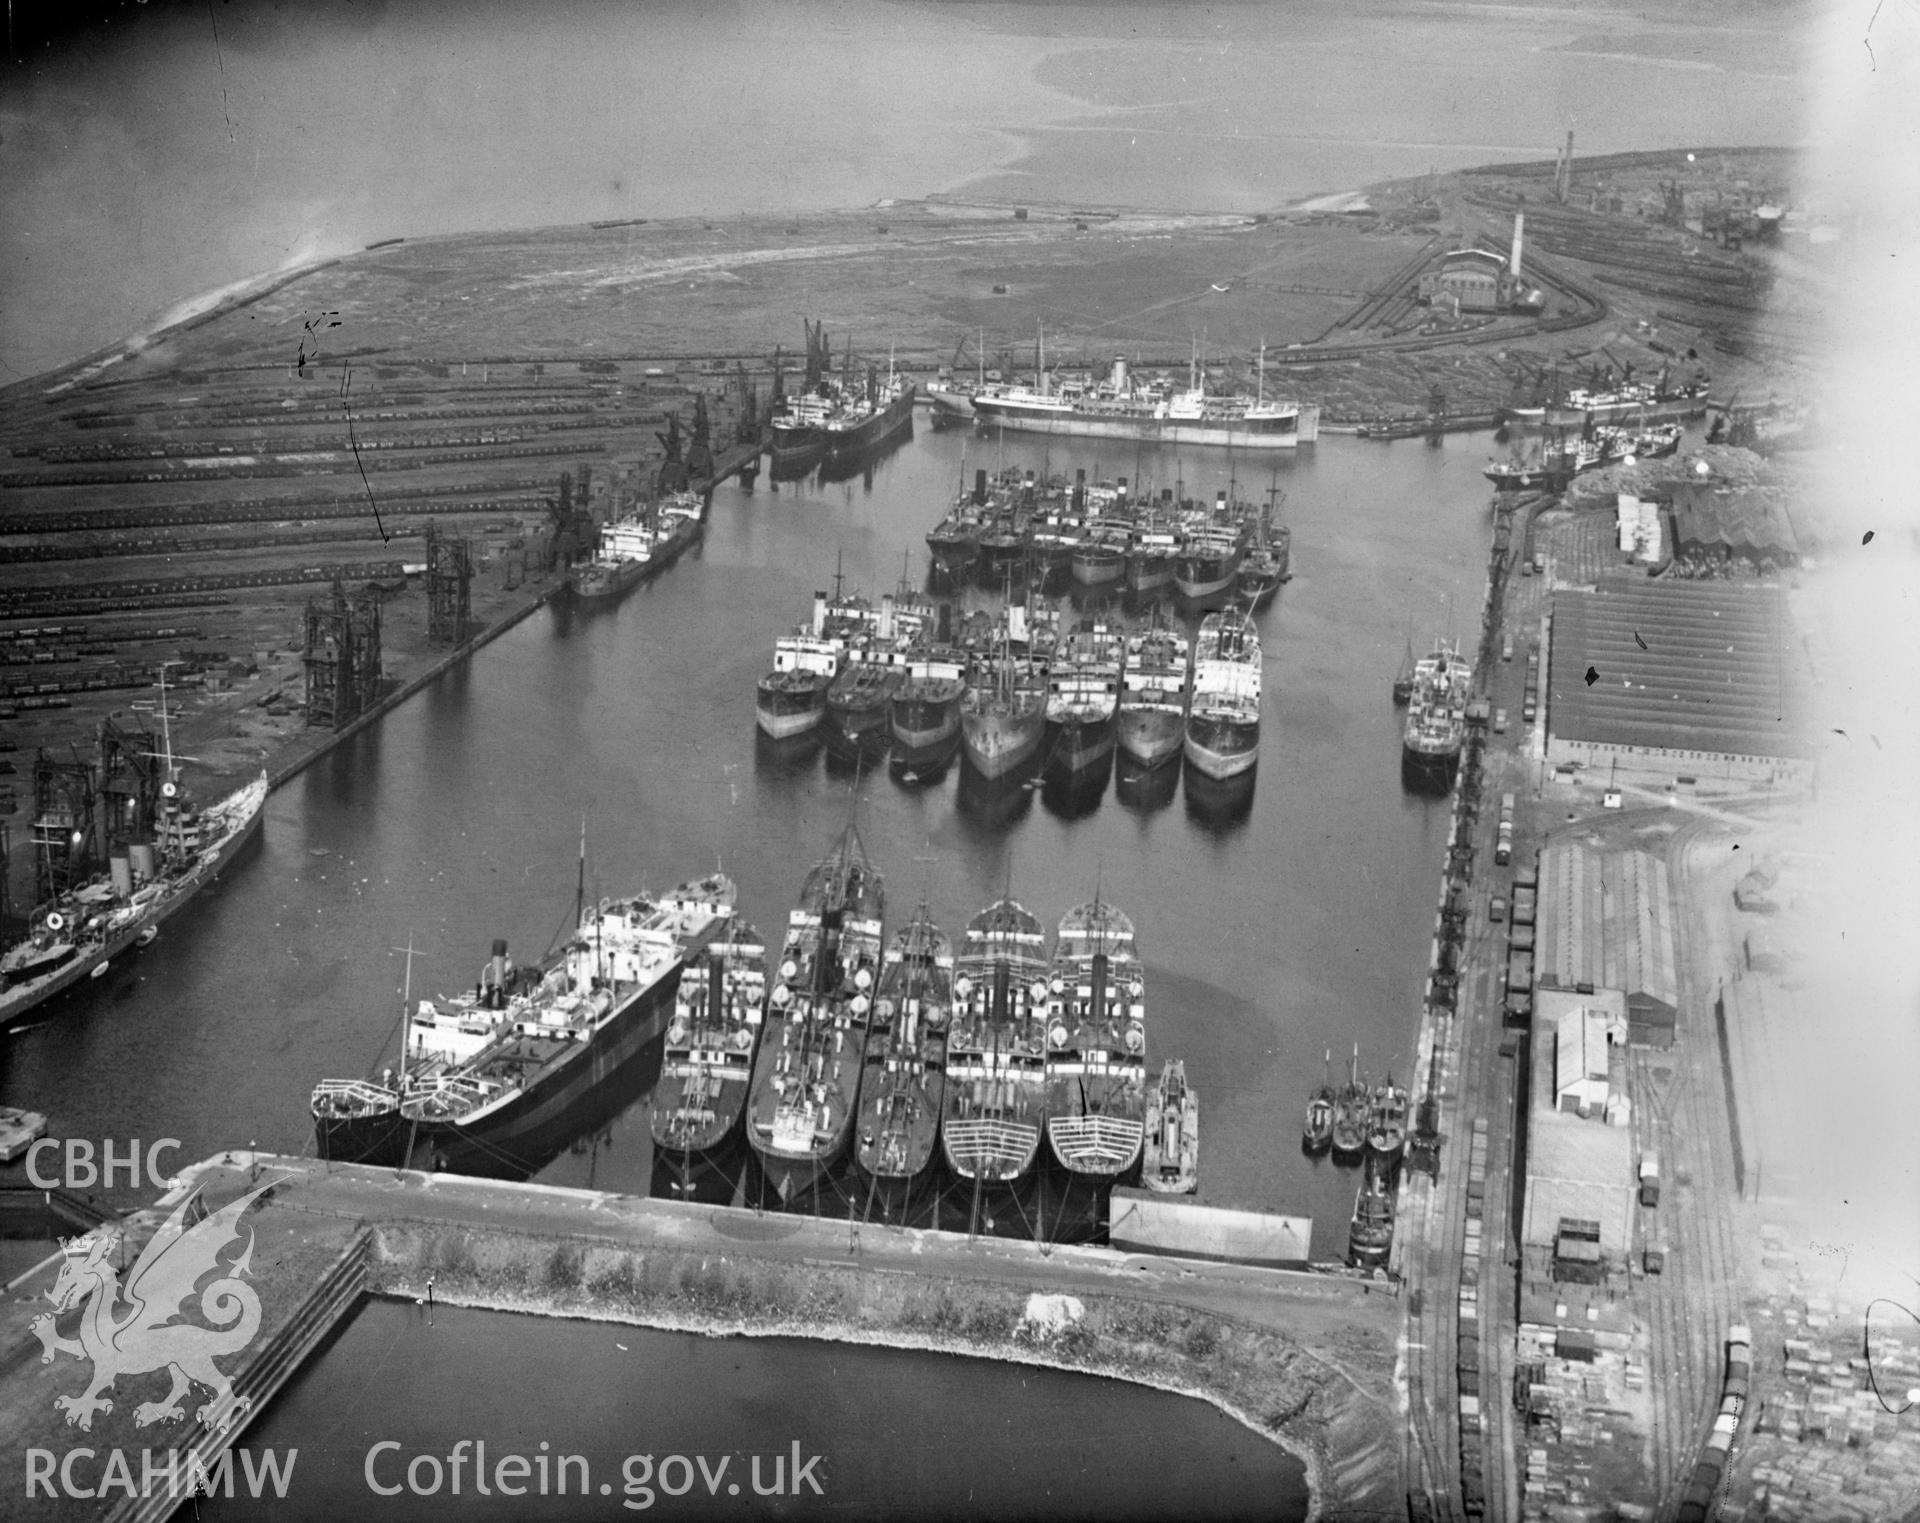 View of Queen Alexandra dock, Cardiff, oblique aerial view. 5?x4? black and white glass plate negative.